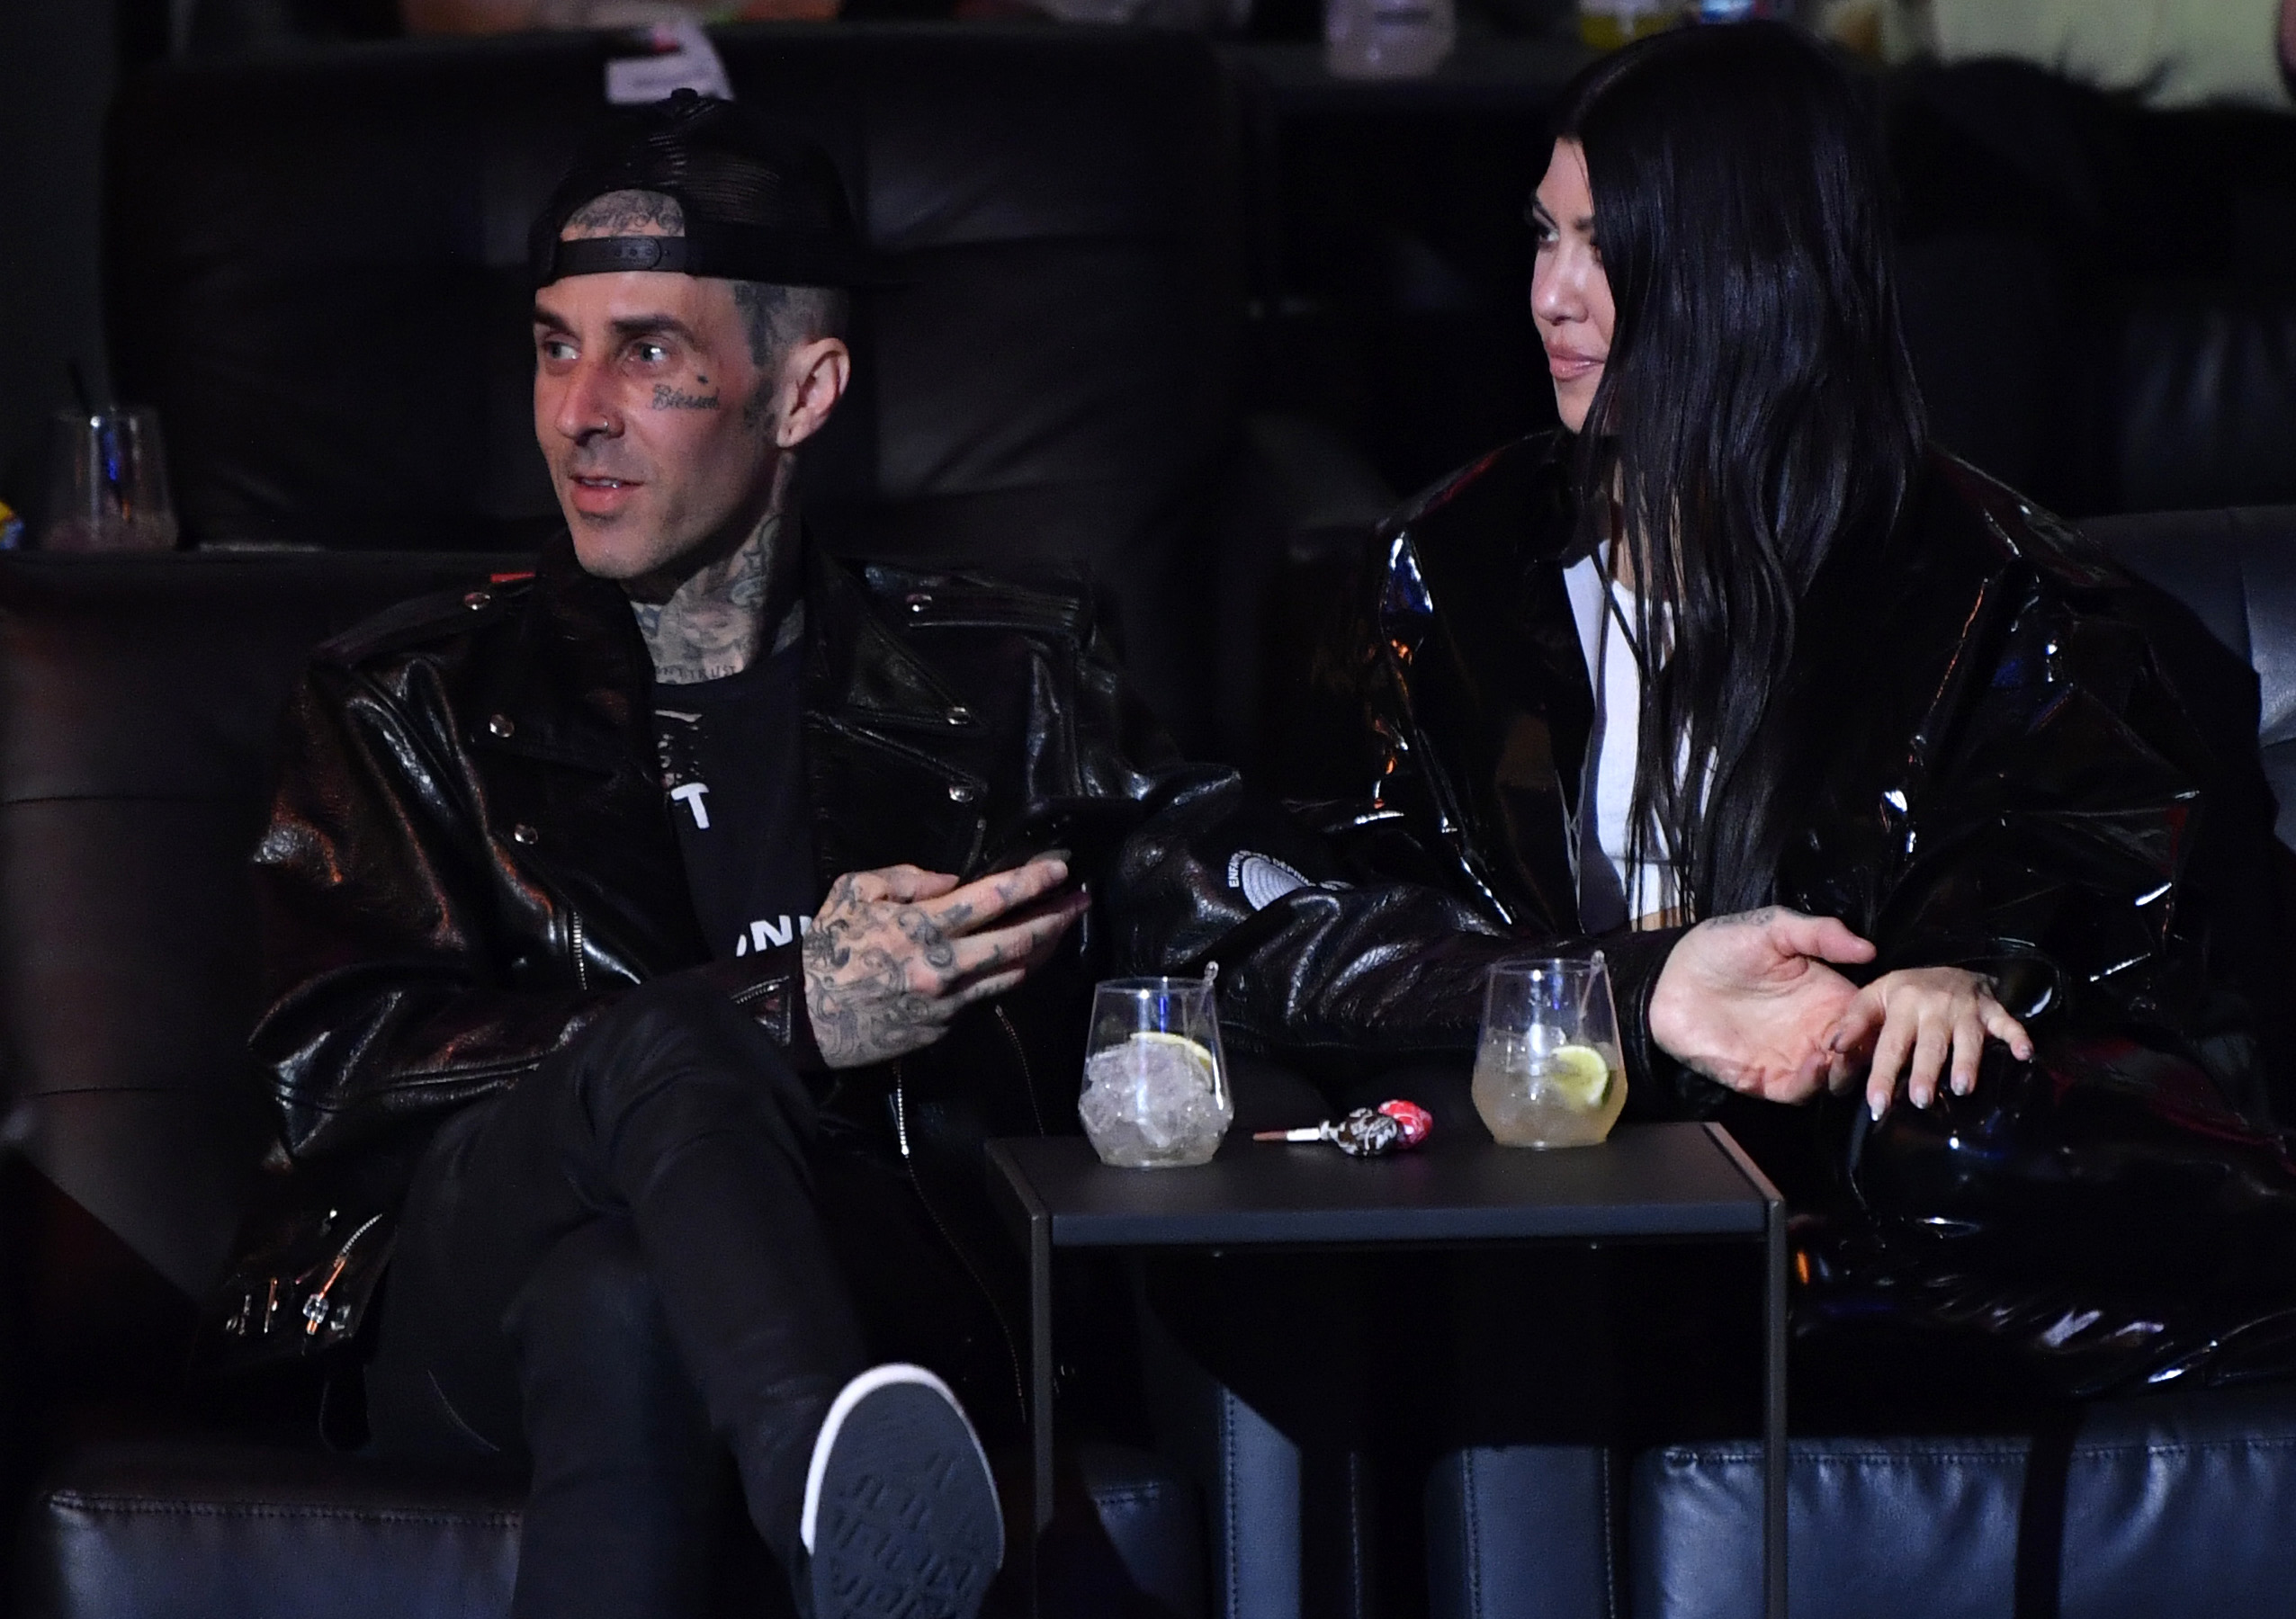 PHOTO: Travis Barker and Kourtney Kardashian are seen during the UFC 260 event at UFC APEX on March 27, 2021 in Las Vegas.